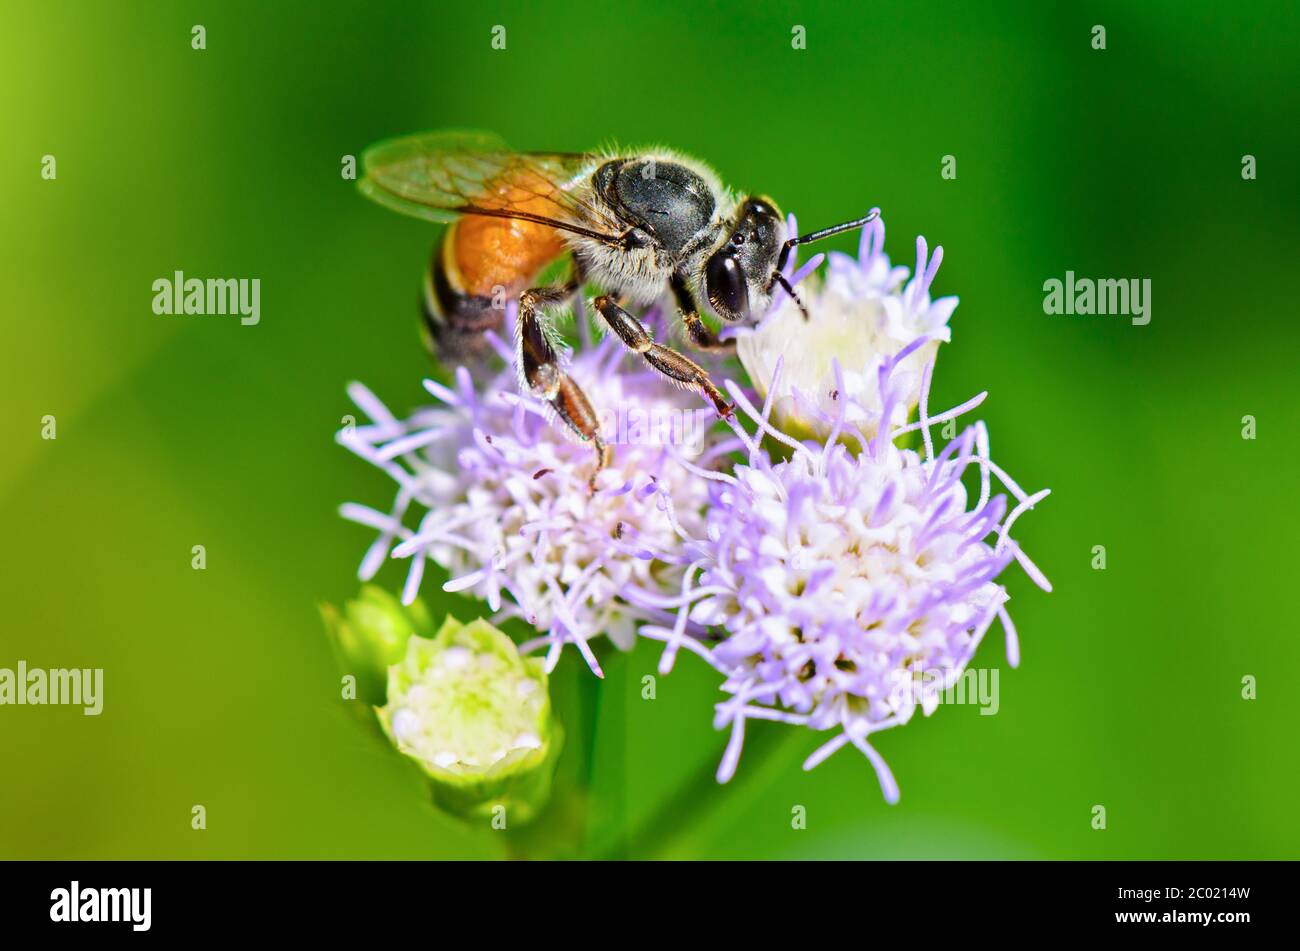 Small bees looking for nectar Stock Photo